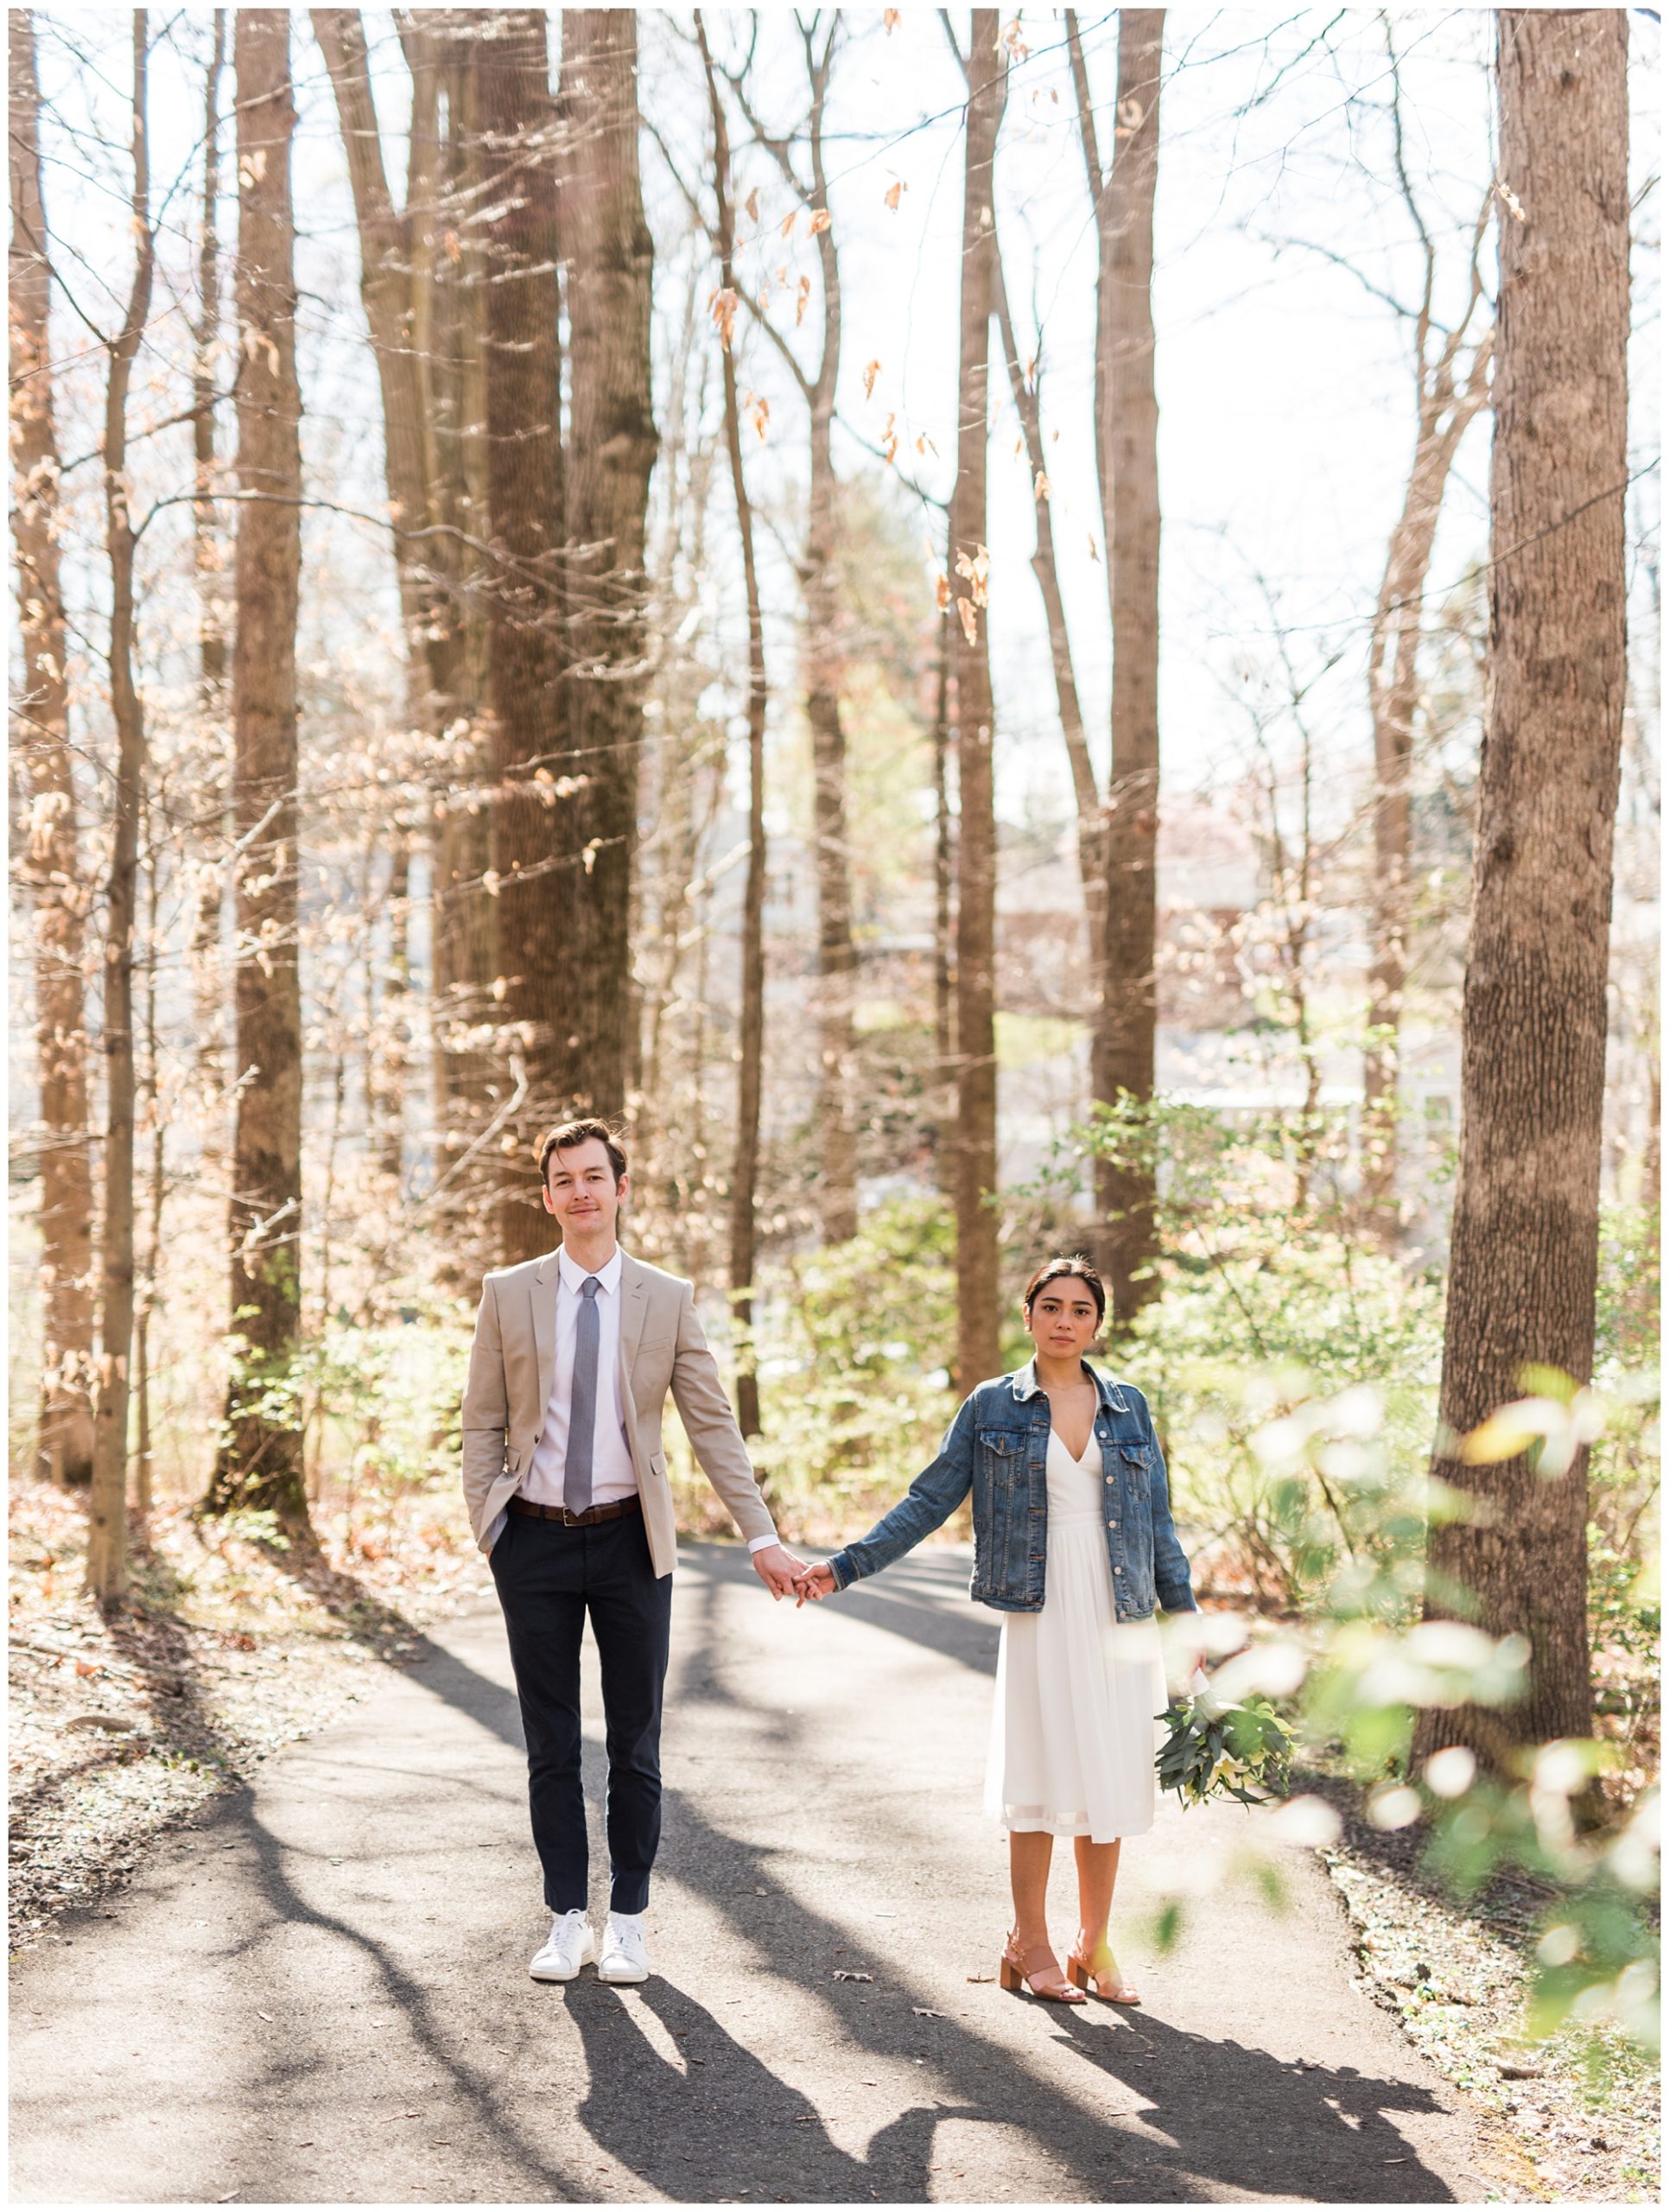 Intimate elopement in the woods in Central Virginia